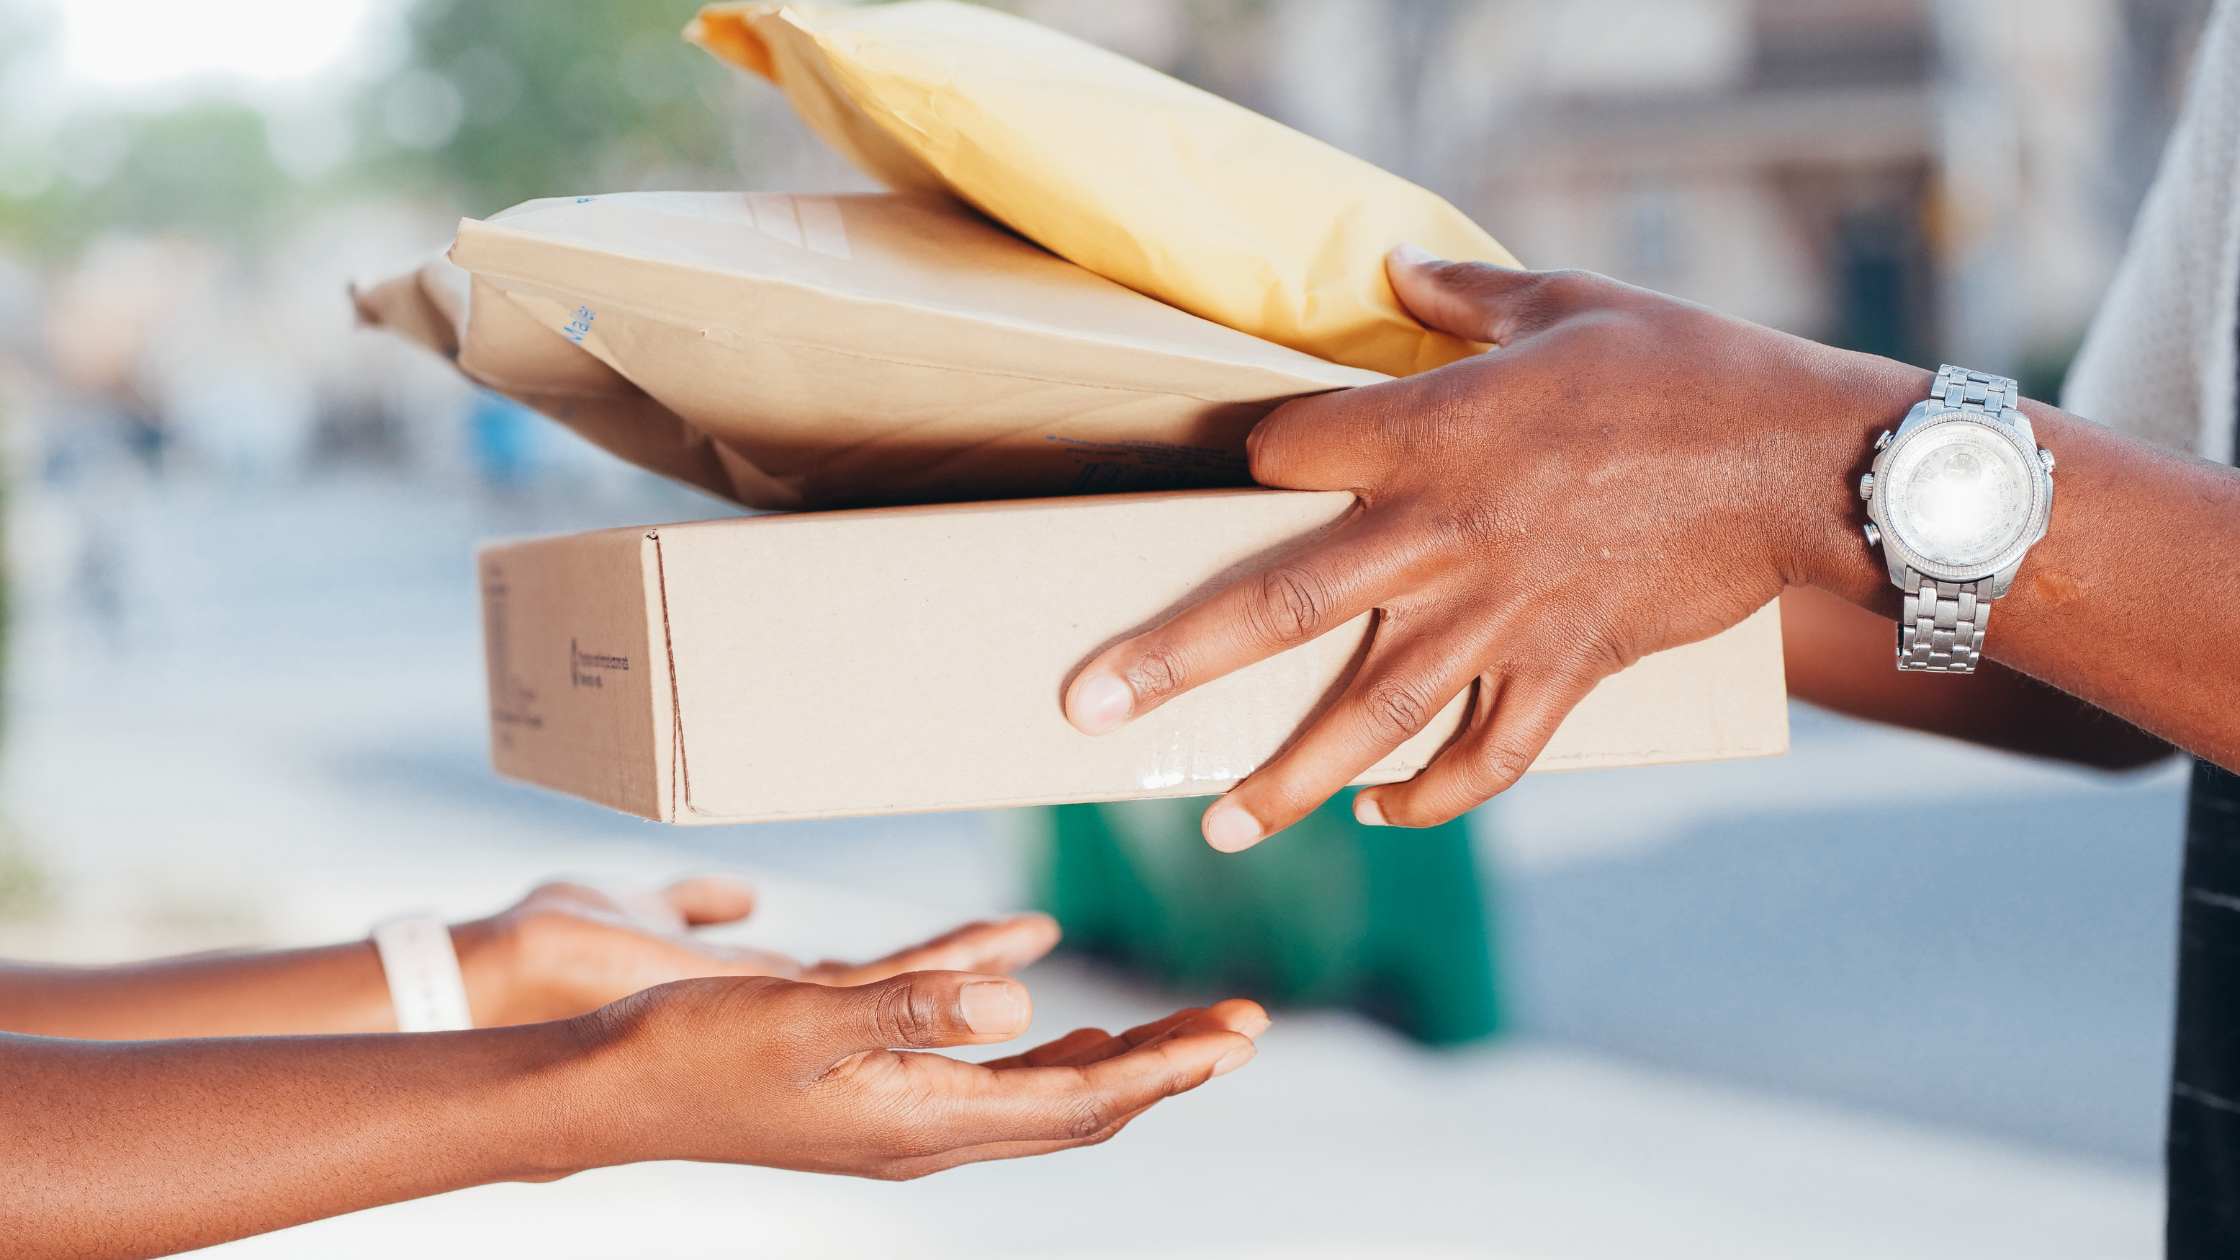 Courier Service for the Students: How Students Can Save with Courier Services